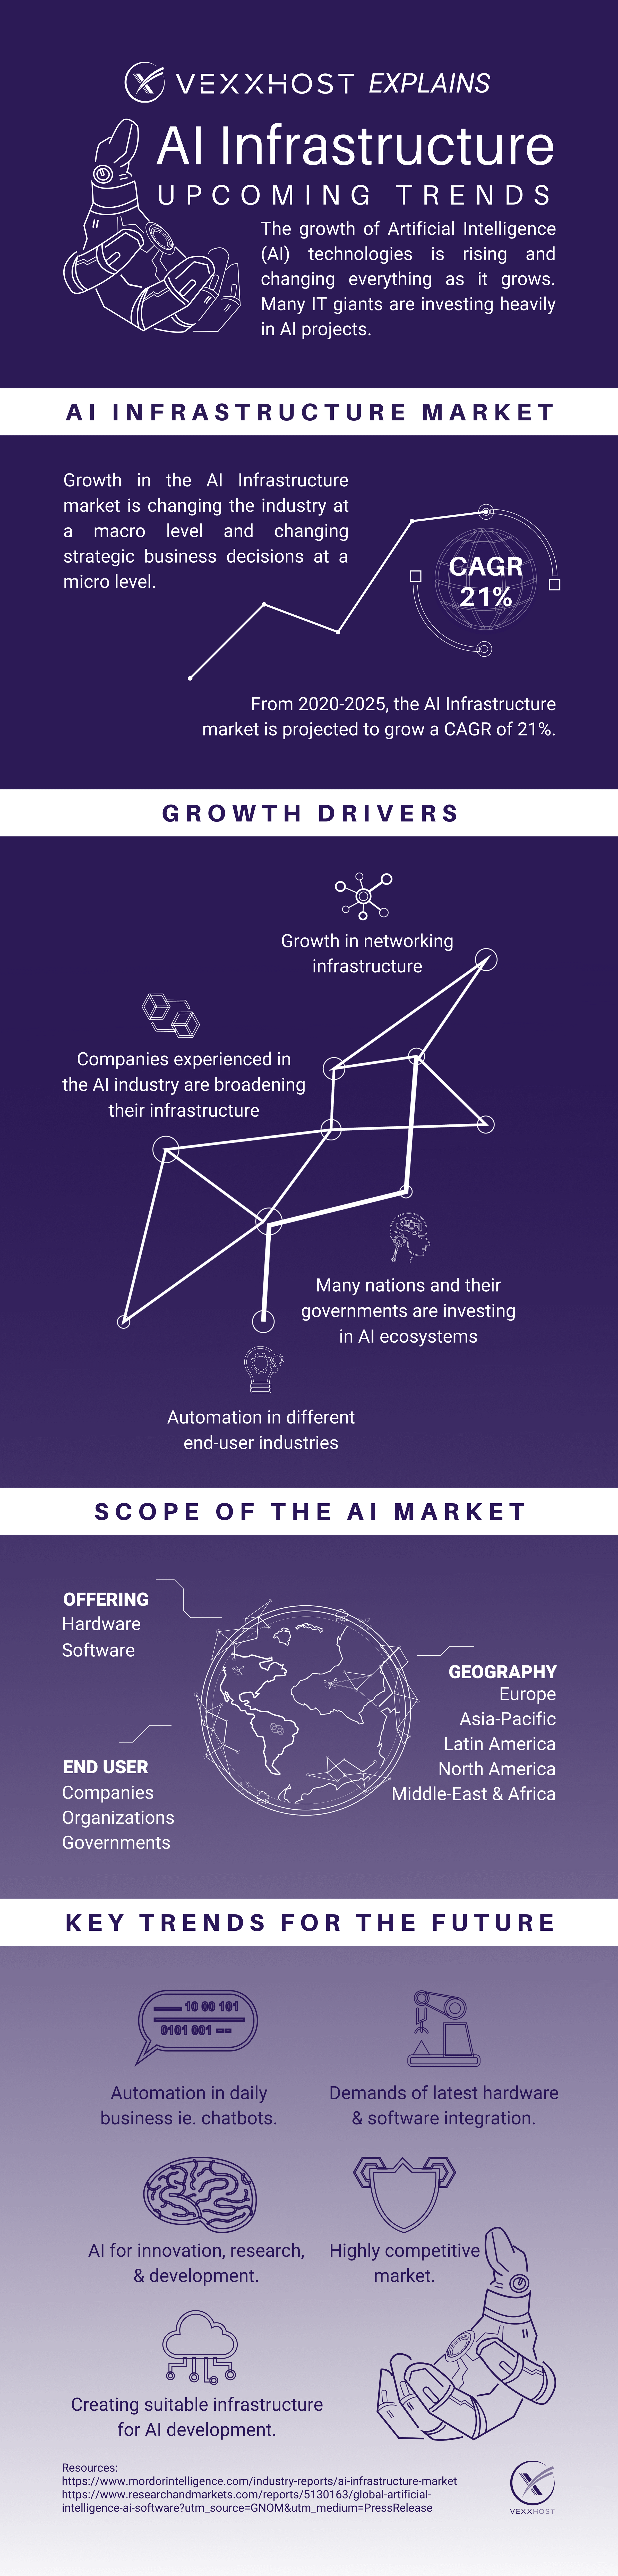 AI Infrastructure Market_ Upcoming Trends_Infographic